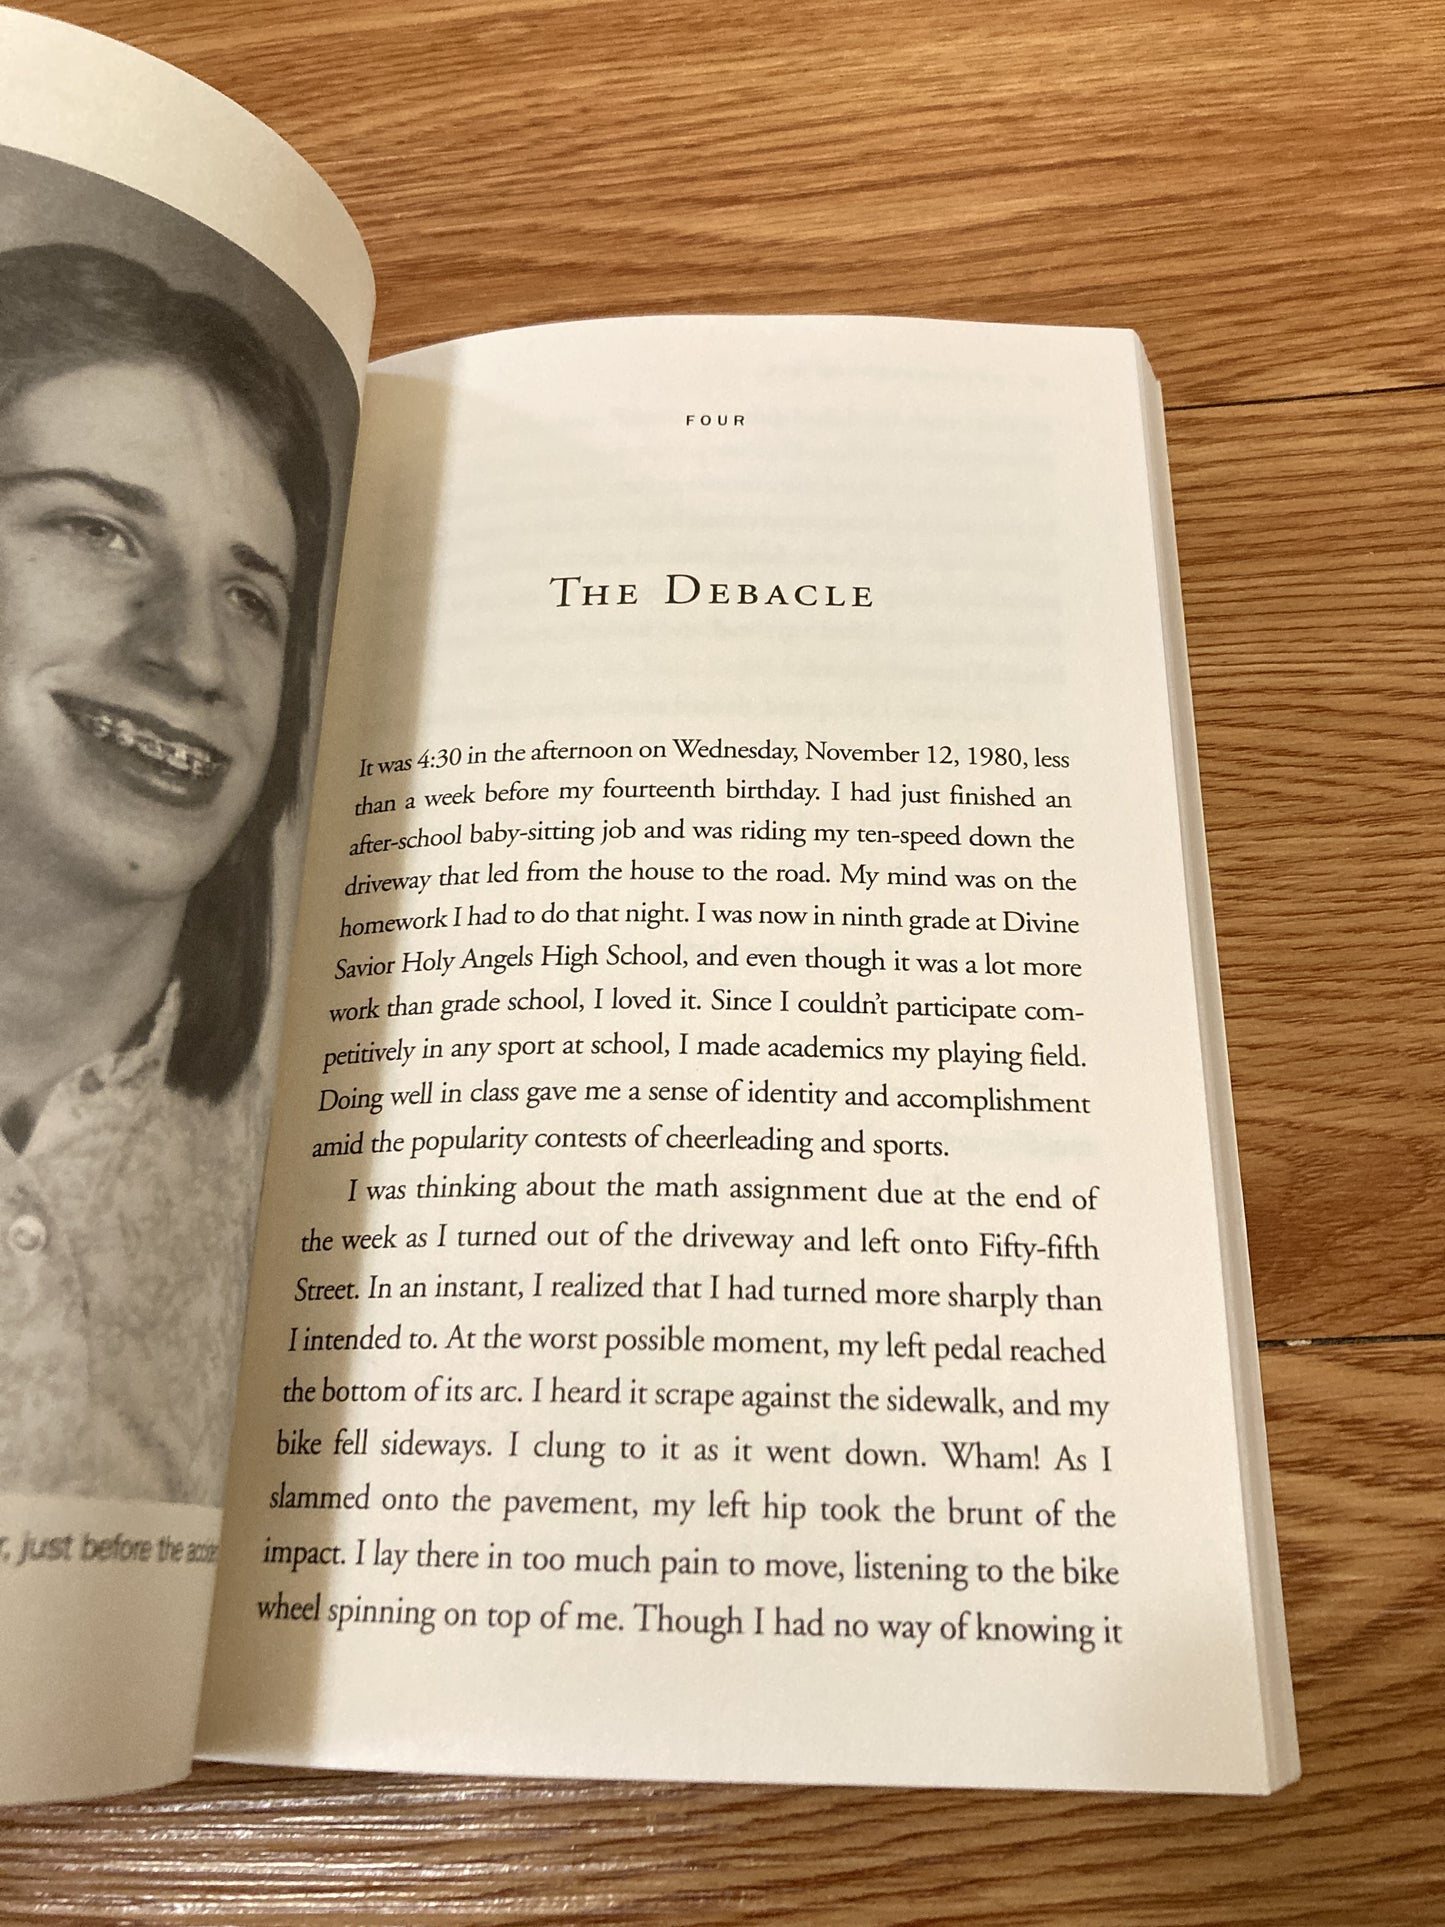 Determined to Win: The Overcoming Spirit of Jean Driscoll